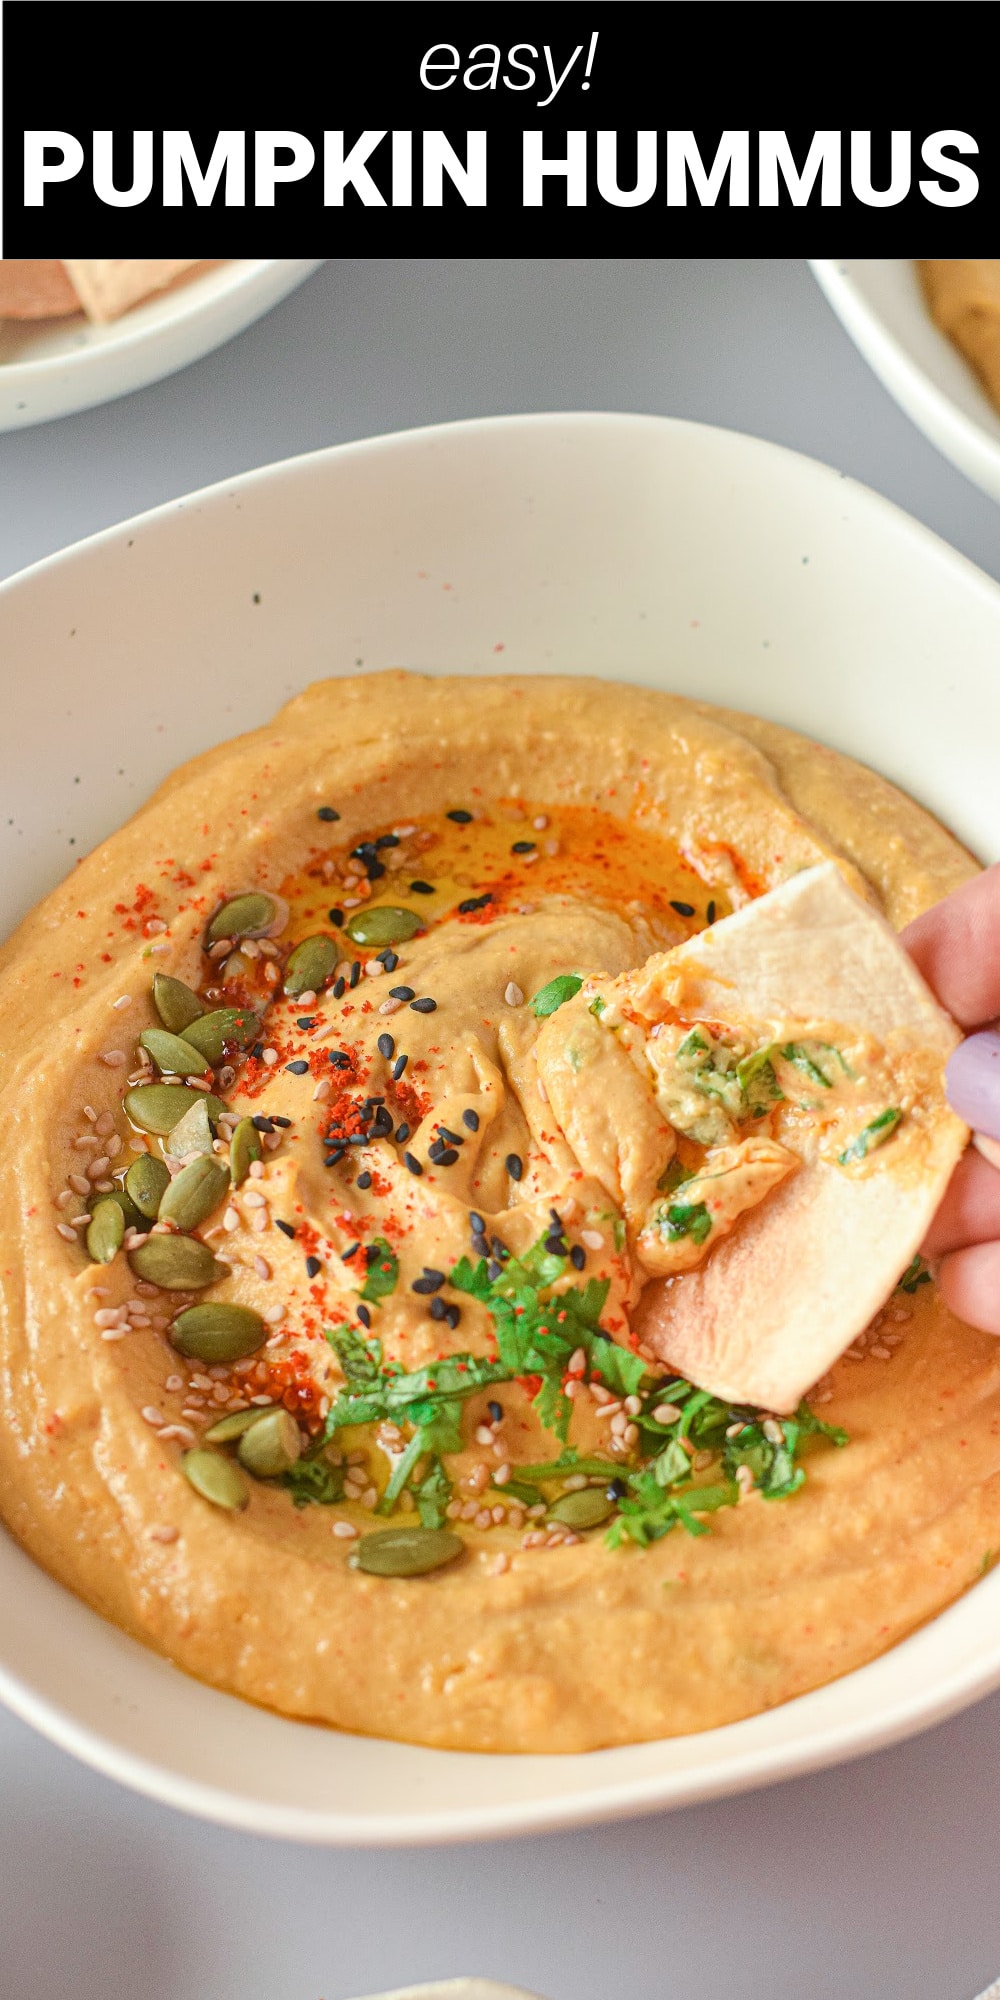 This pumpkin hummus recipe puts a fall twist on a traditional hummus, making it even more creamy and delicious than the original. Roasted pumpkin puree and chickpeas are blended in a food processor, along with fresh garlic, tahini, tangy lime juice, and fragrant spices. 